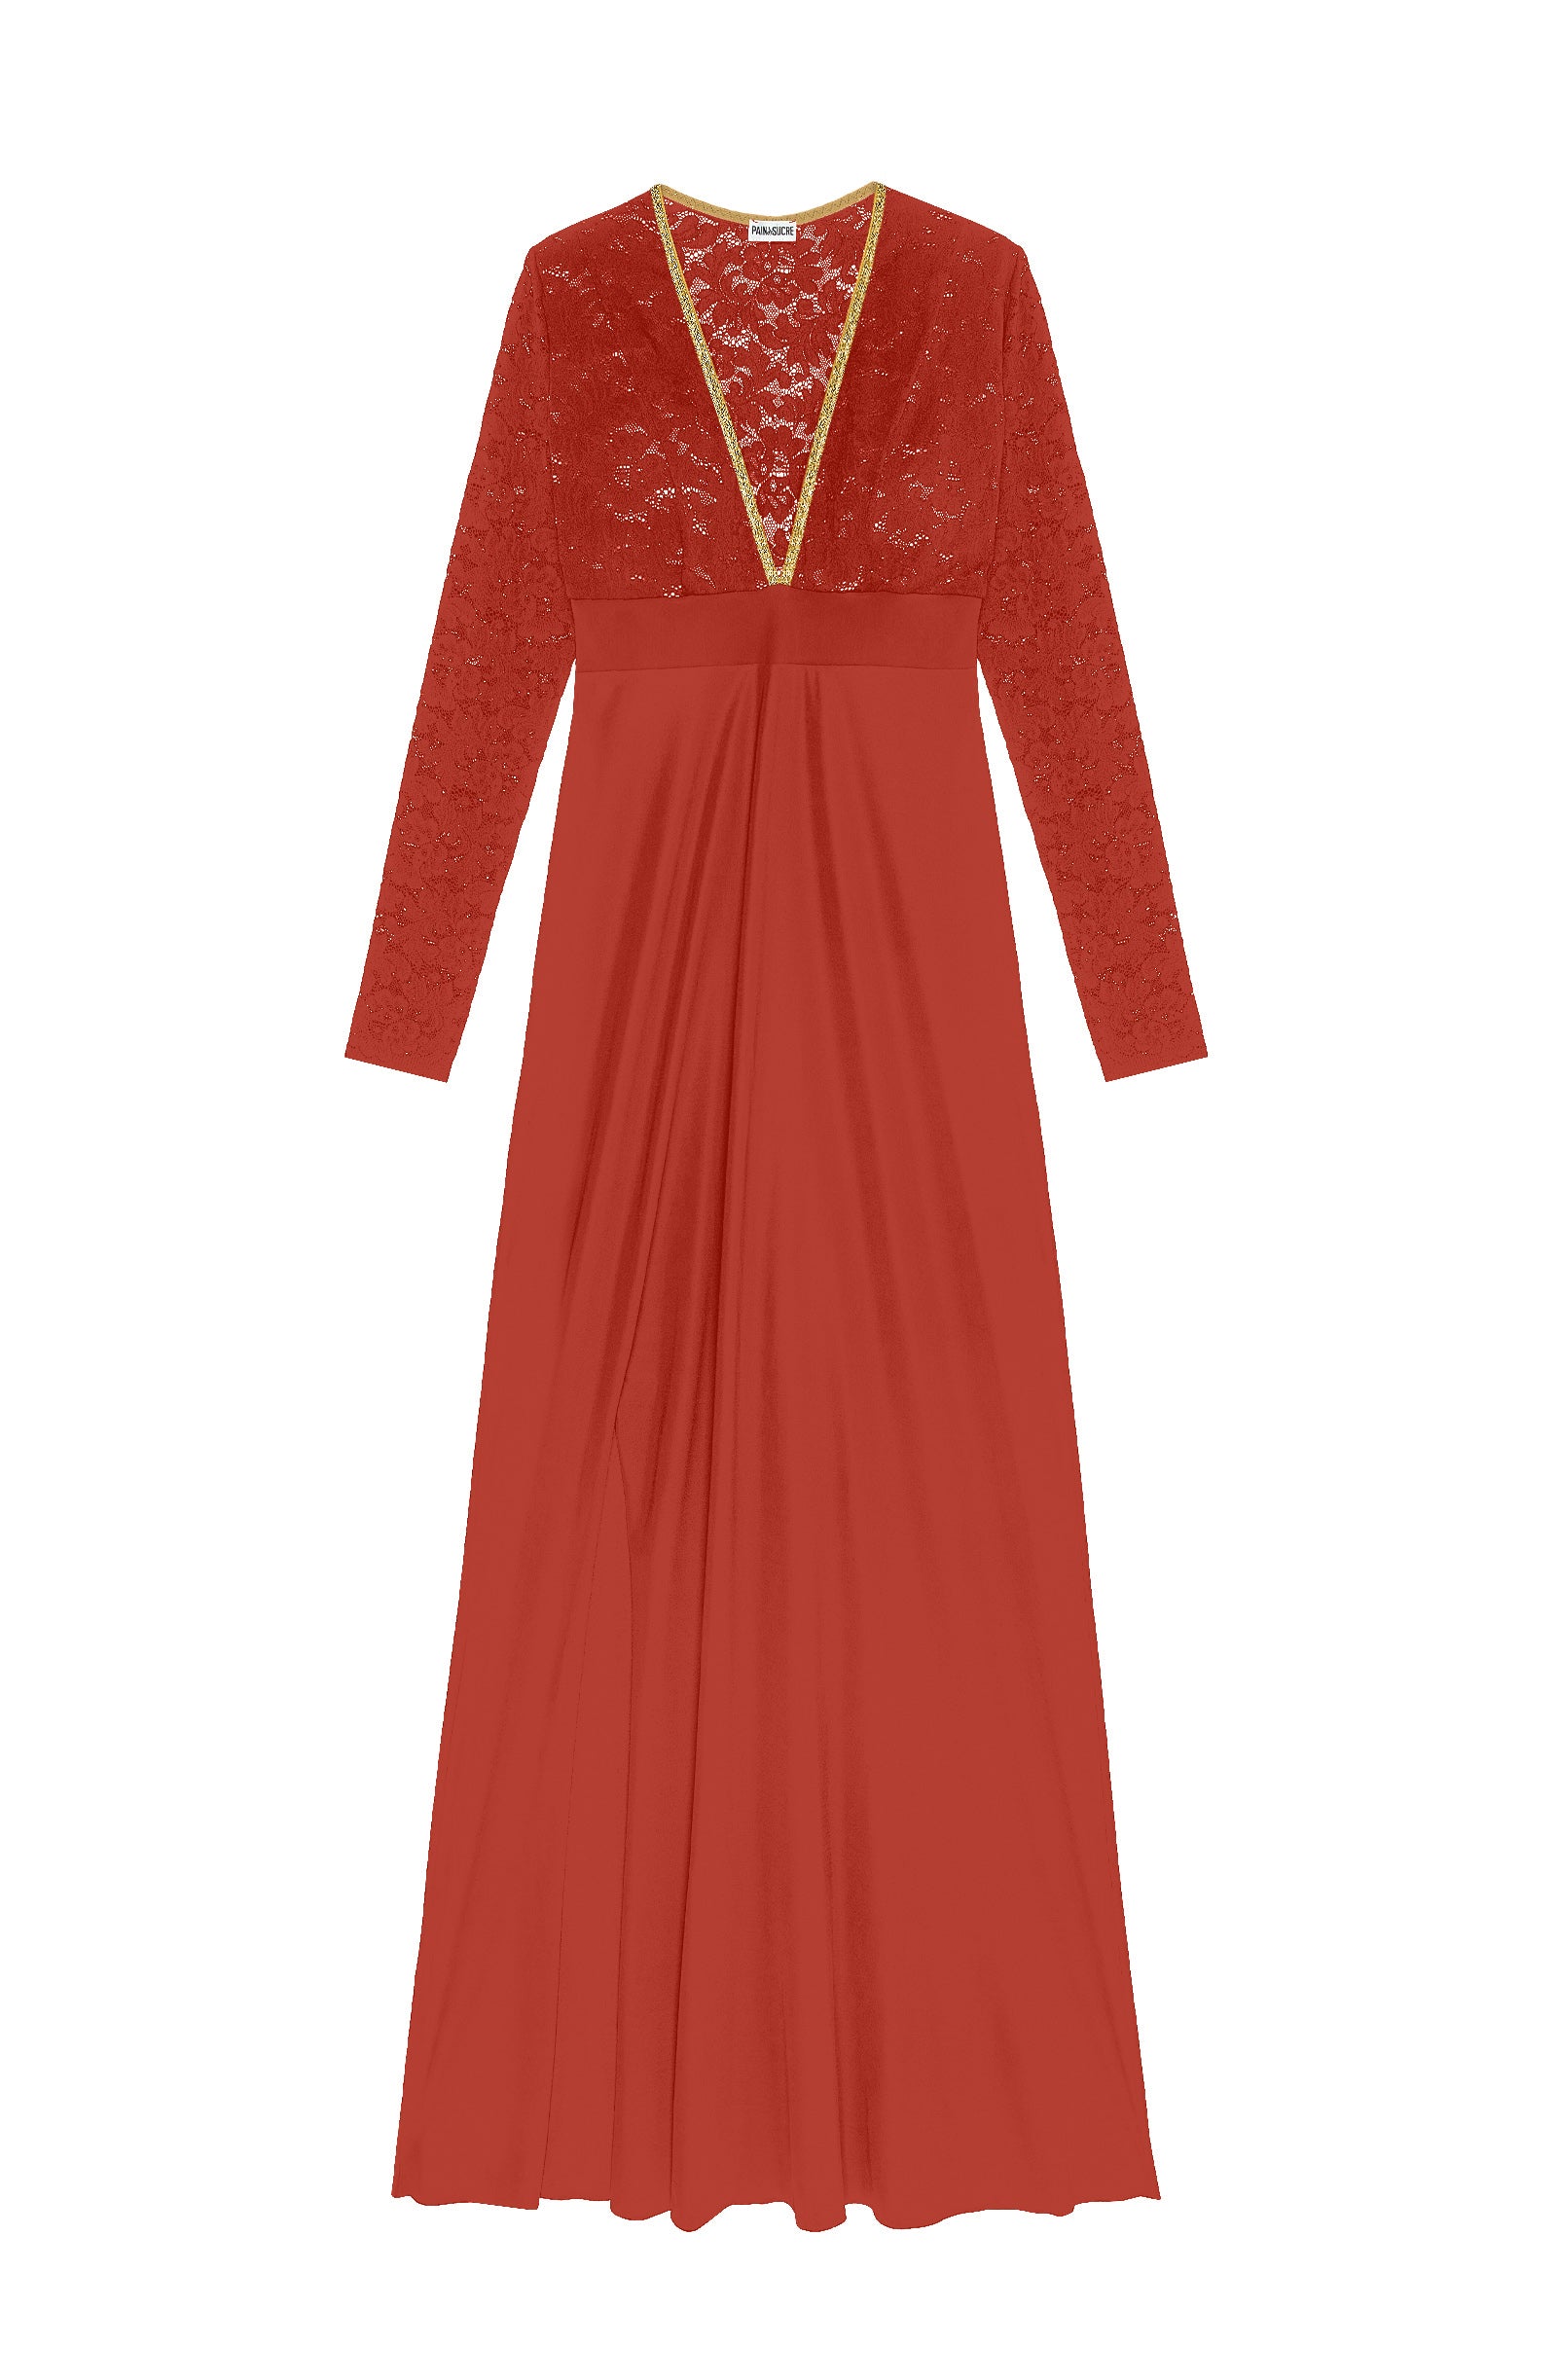 rivia Long brick red dress in lace and voile